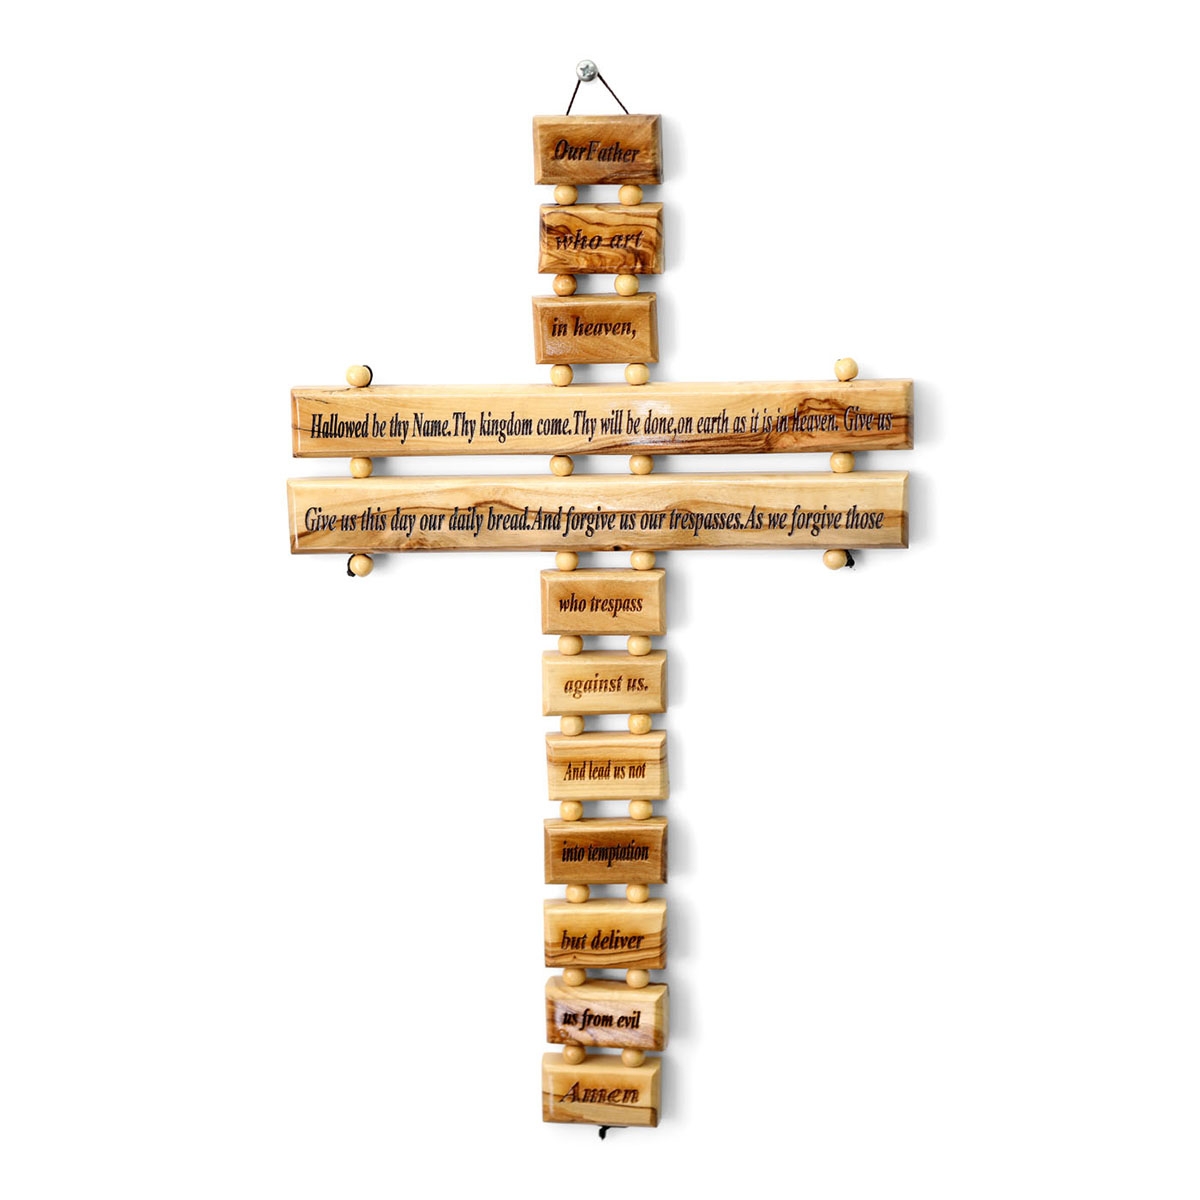 Olive Wood Roman Cross Wall Hanging with the Lord's Prayer - 1